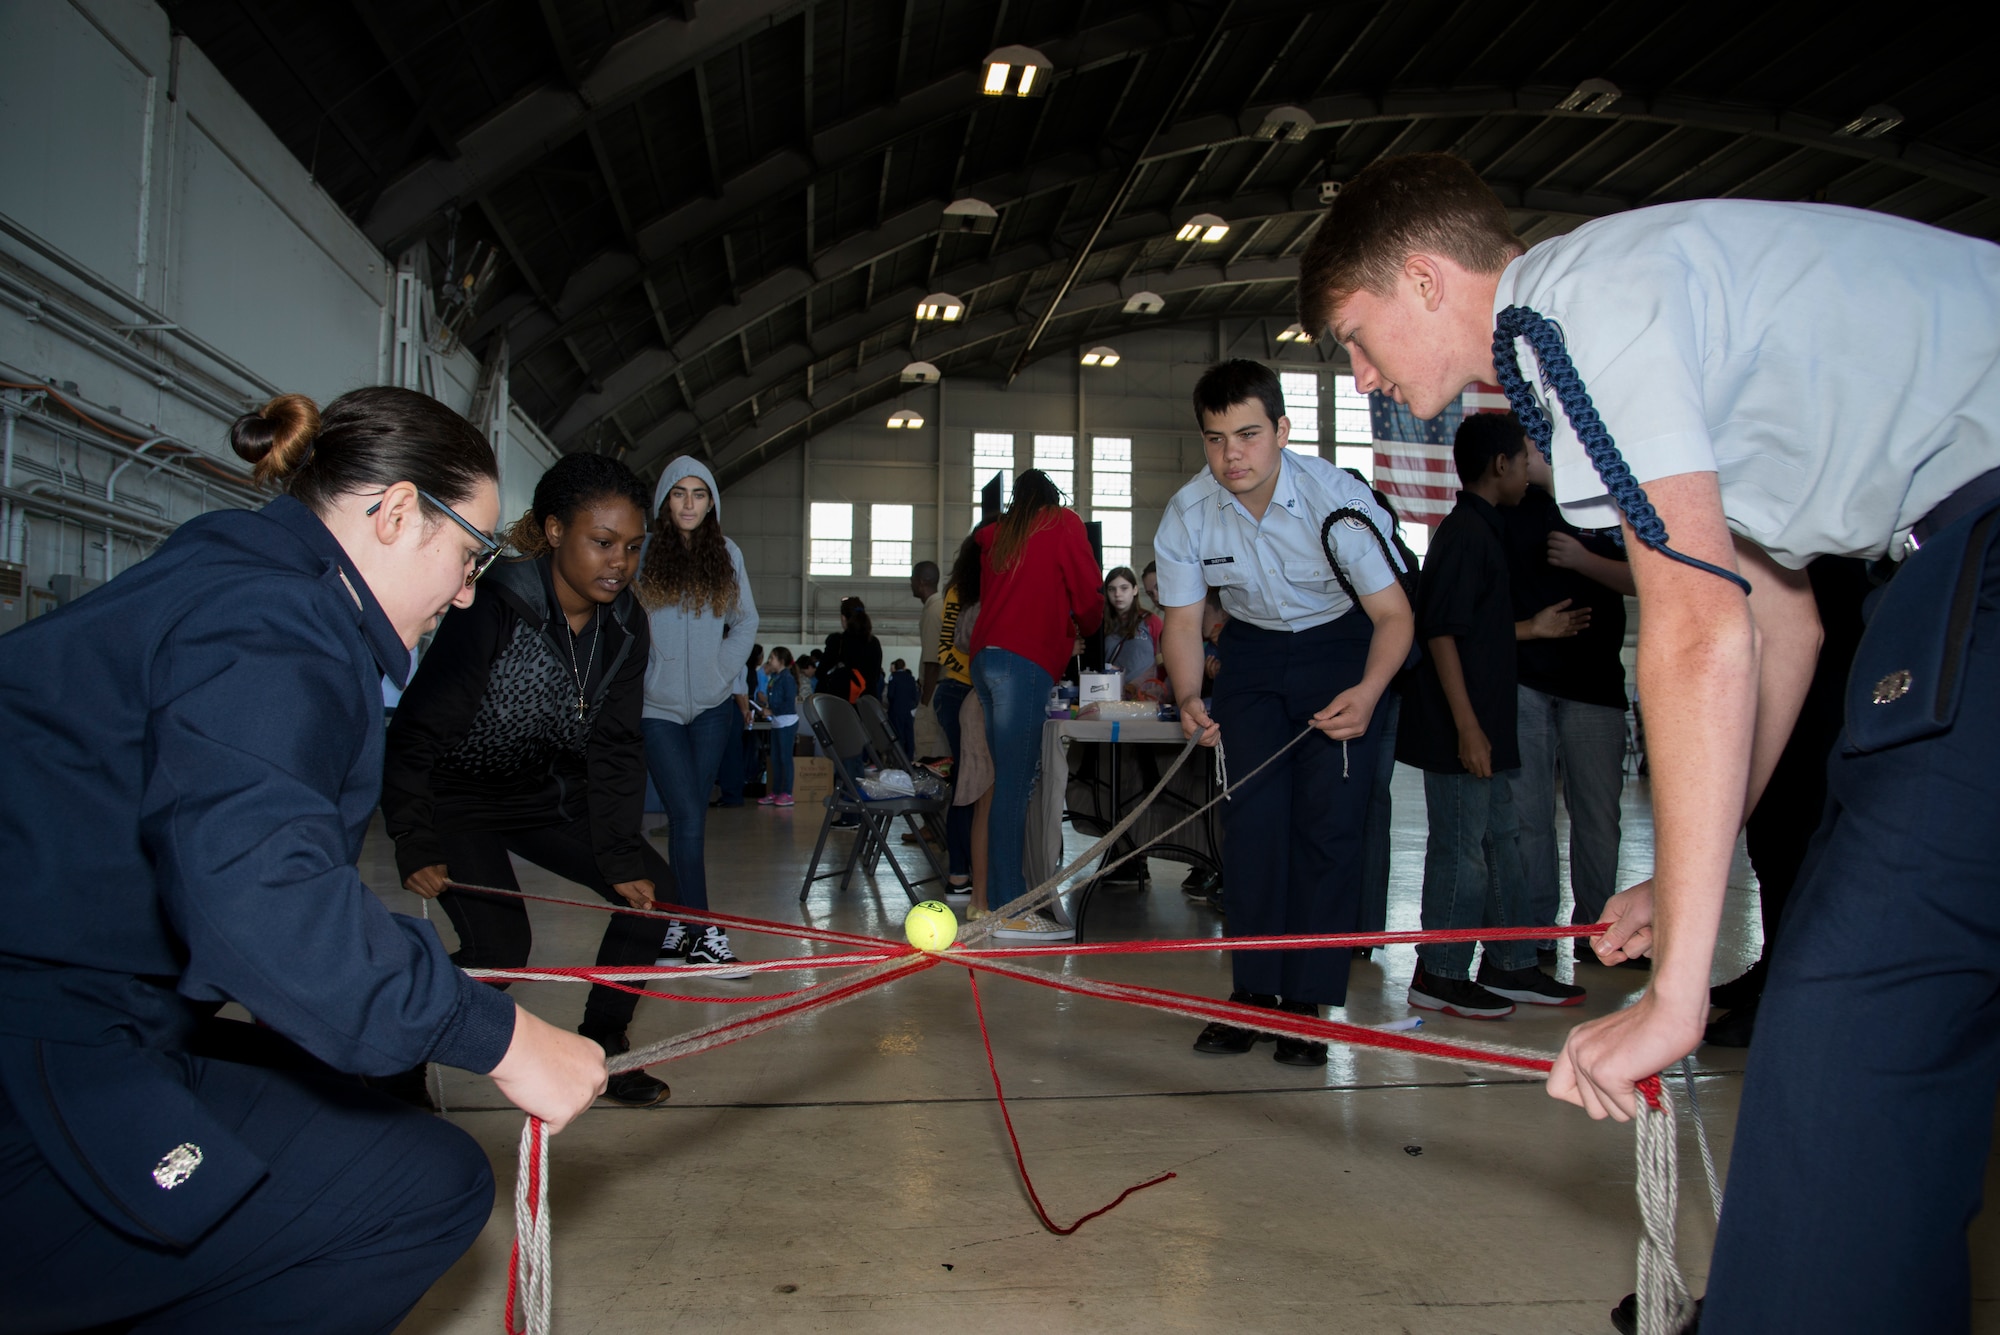 Florida Junior Reserve Officer Training Corps (JROTC) cadets participate in a team building exercise during the Science, Technology, Engineering, Arts and Math (STEAM) Day at MacDill Air Force Base, Fla., March 21, 2018.